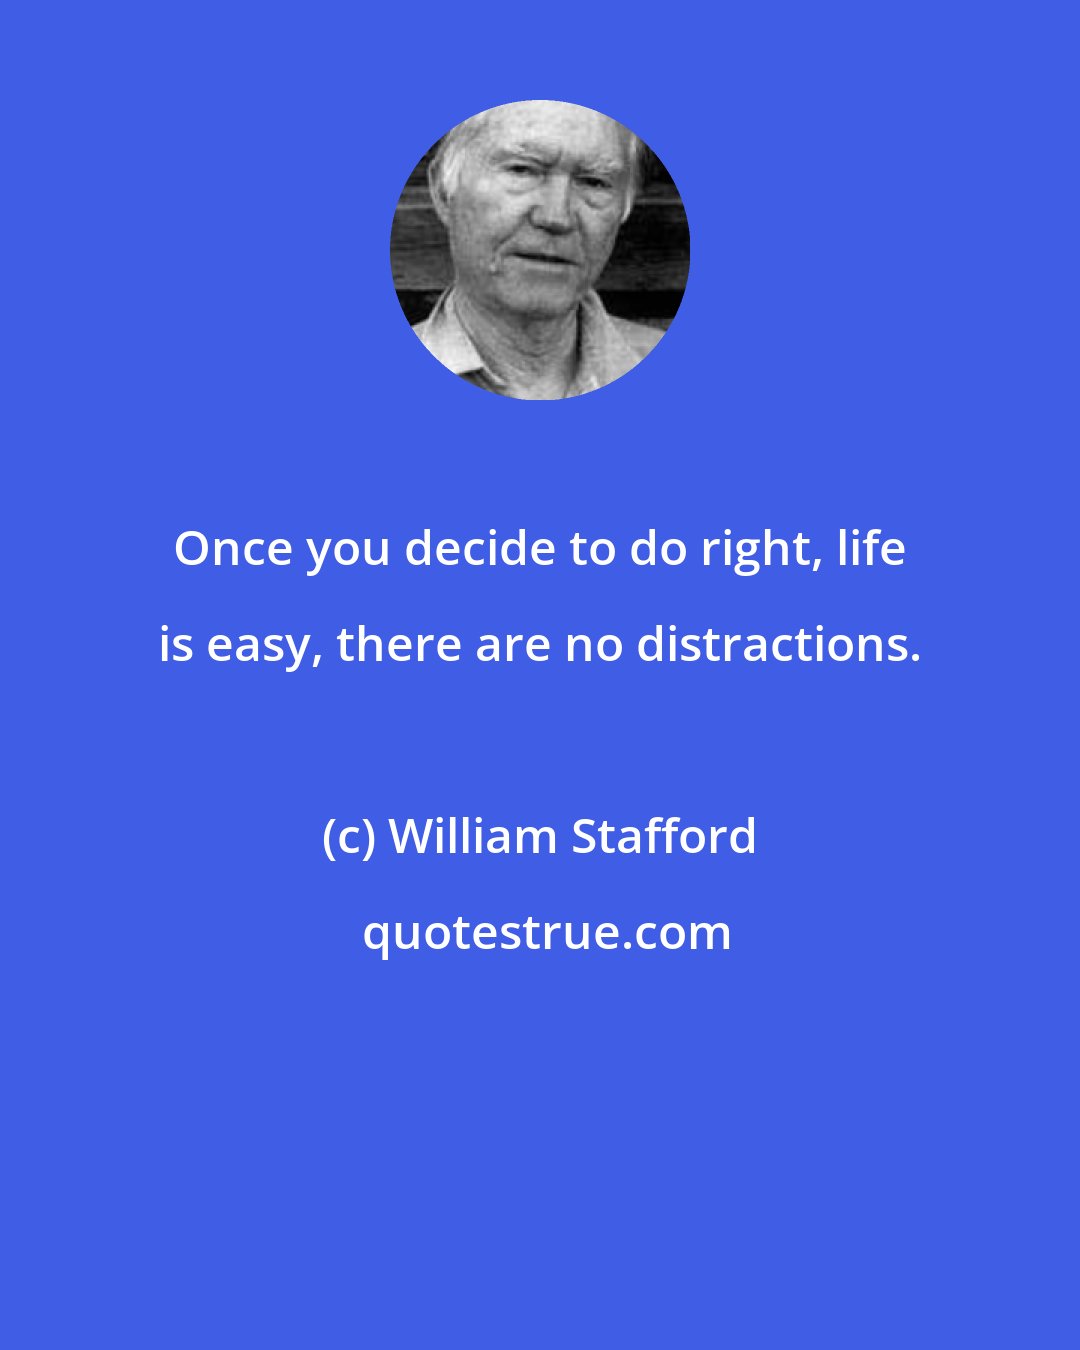 William Stafford: Once you decide to do right, life is easy, there are no distractions.